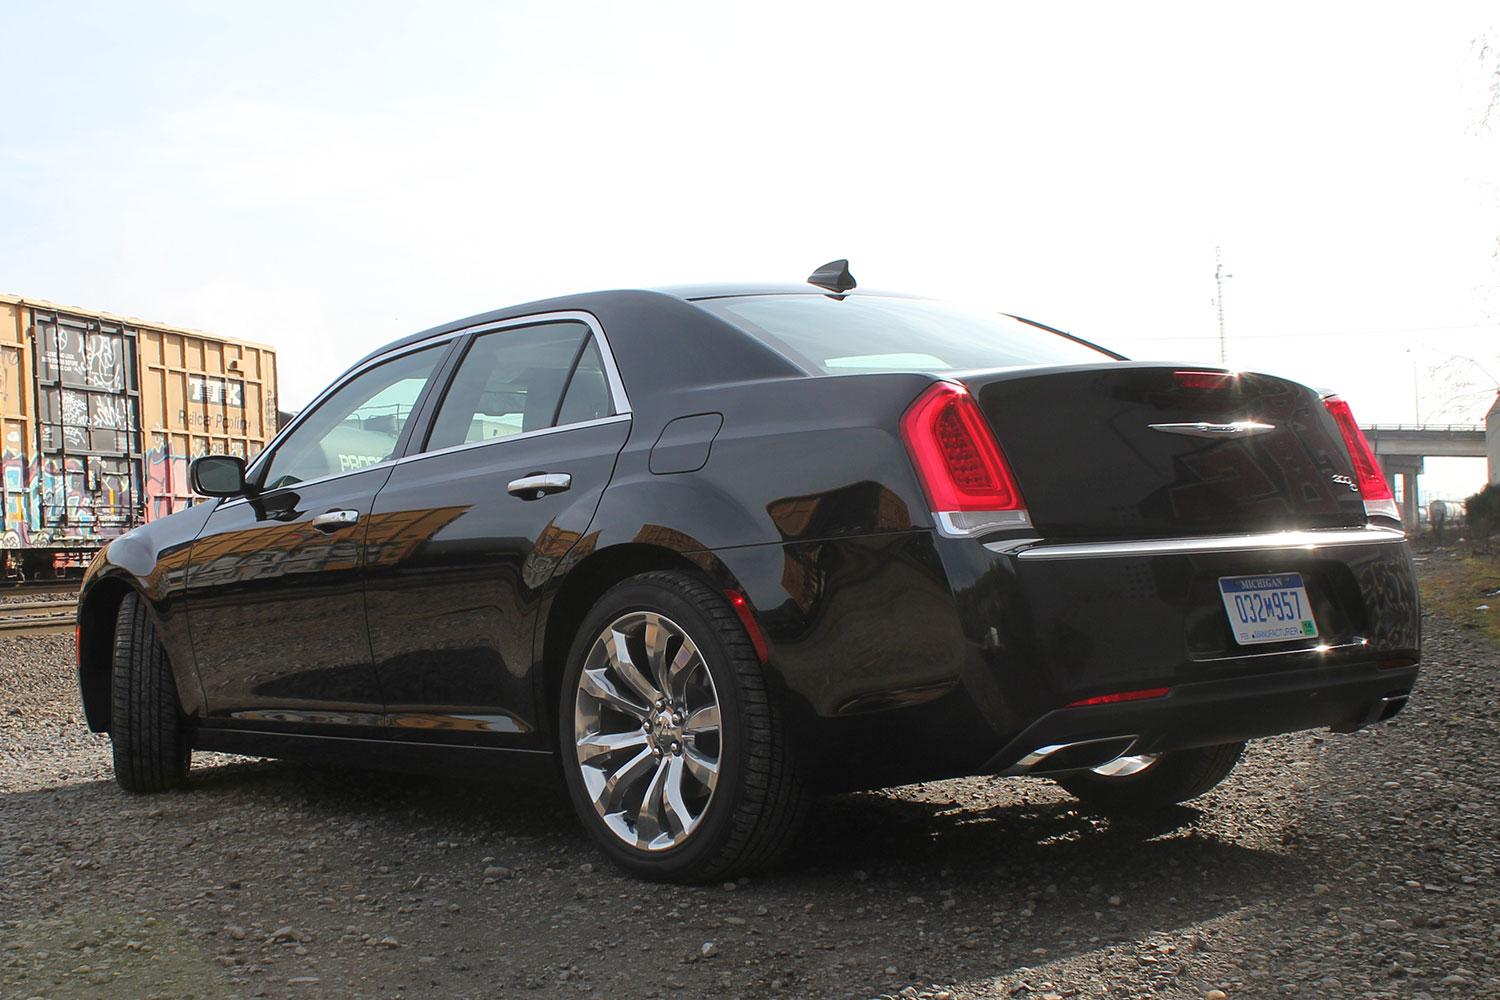 Day-by-Day Review: 2015 Chrysler 300C